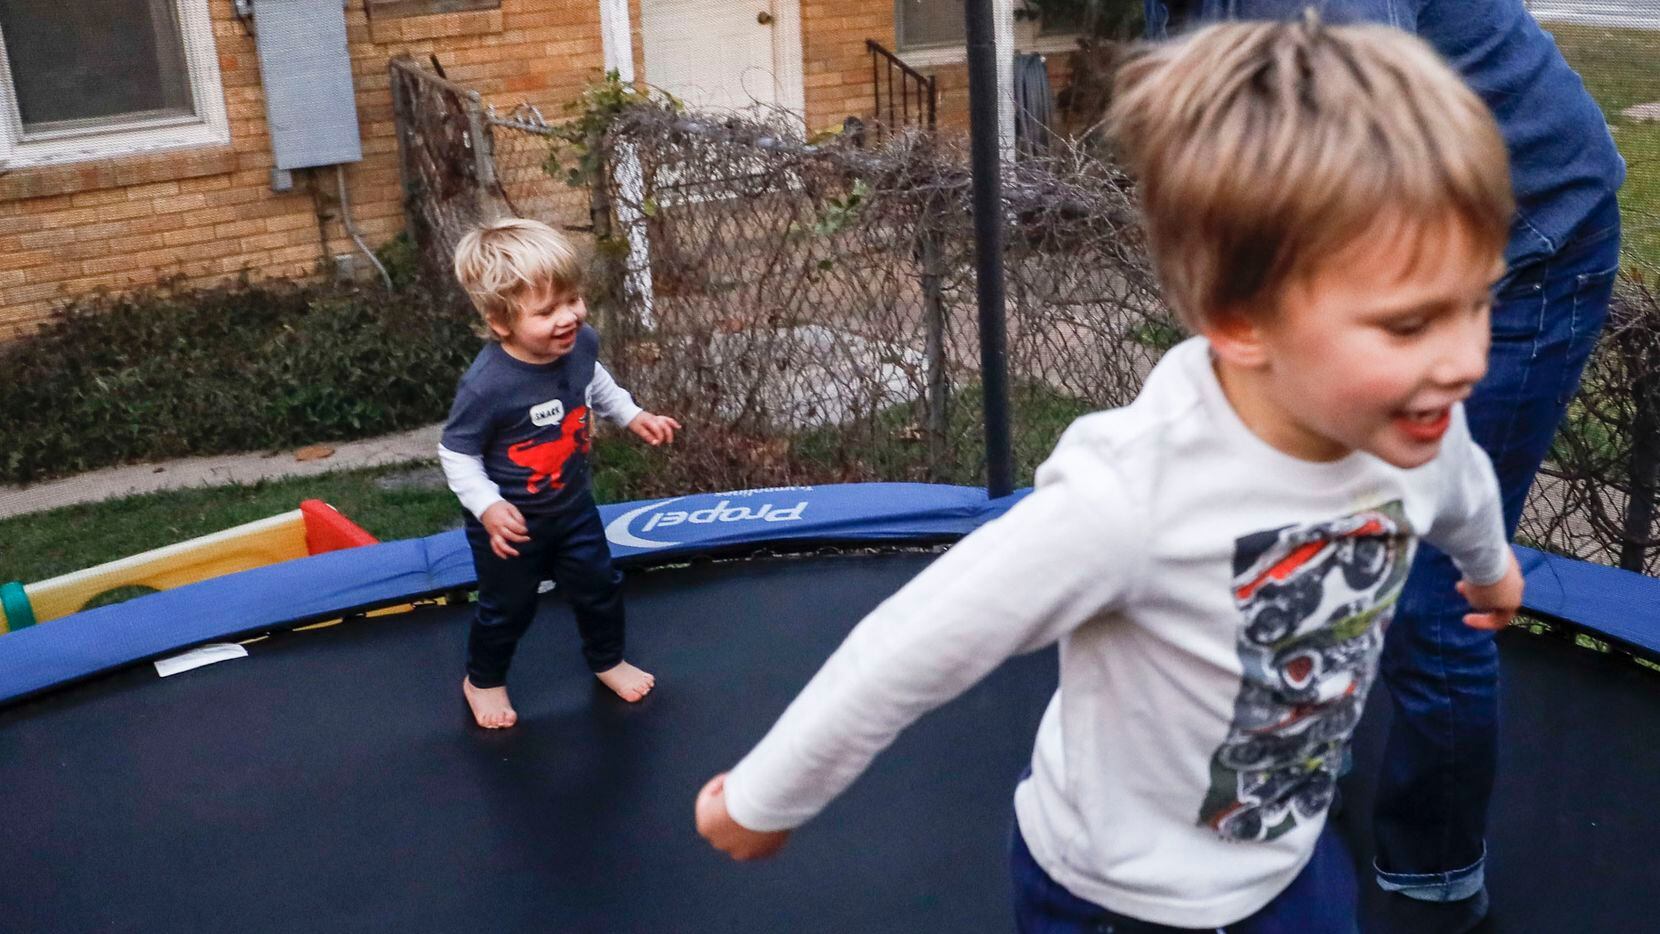 Craig Hoffman plays with his son Roky, 2, as River, 4, jumps next to them on the trampoline at their home in Dallas, Tuesday.. In mid-November the family got sick with a cough, runny nose and headache.